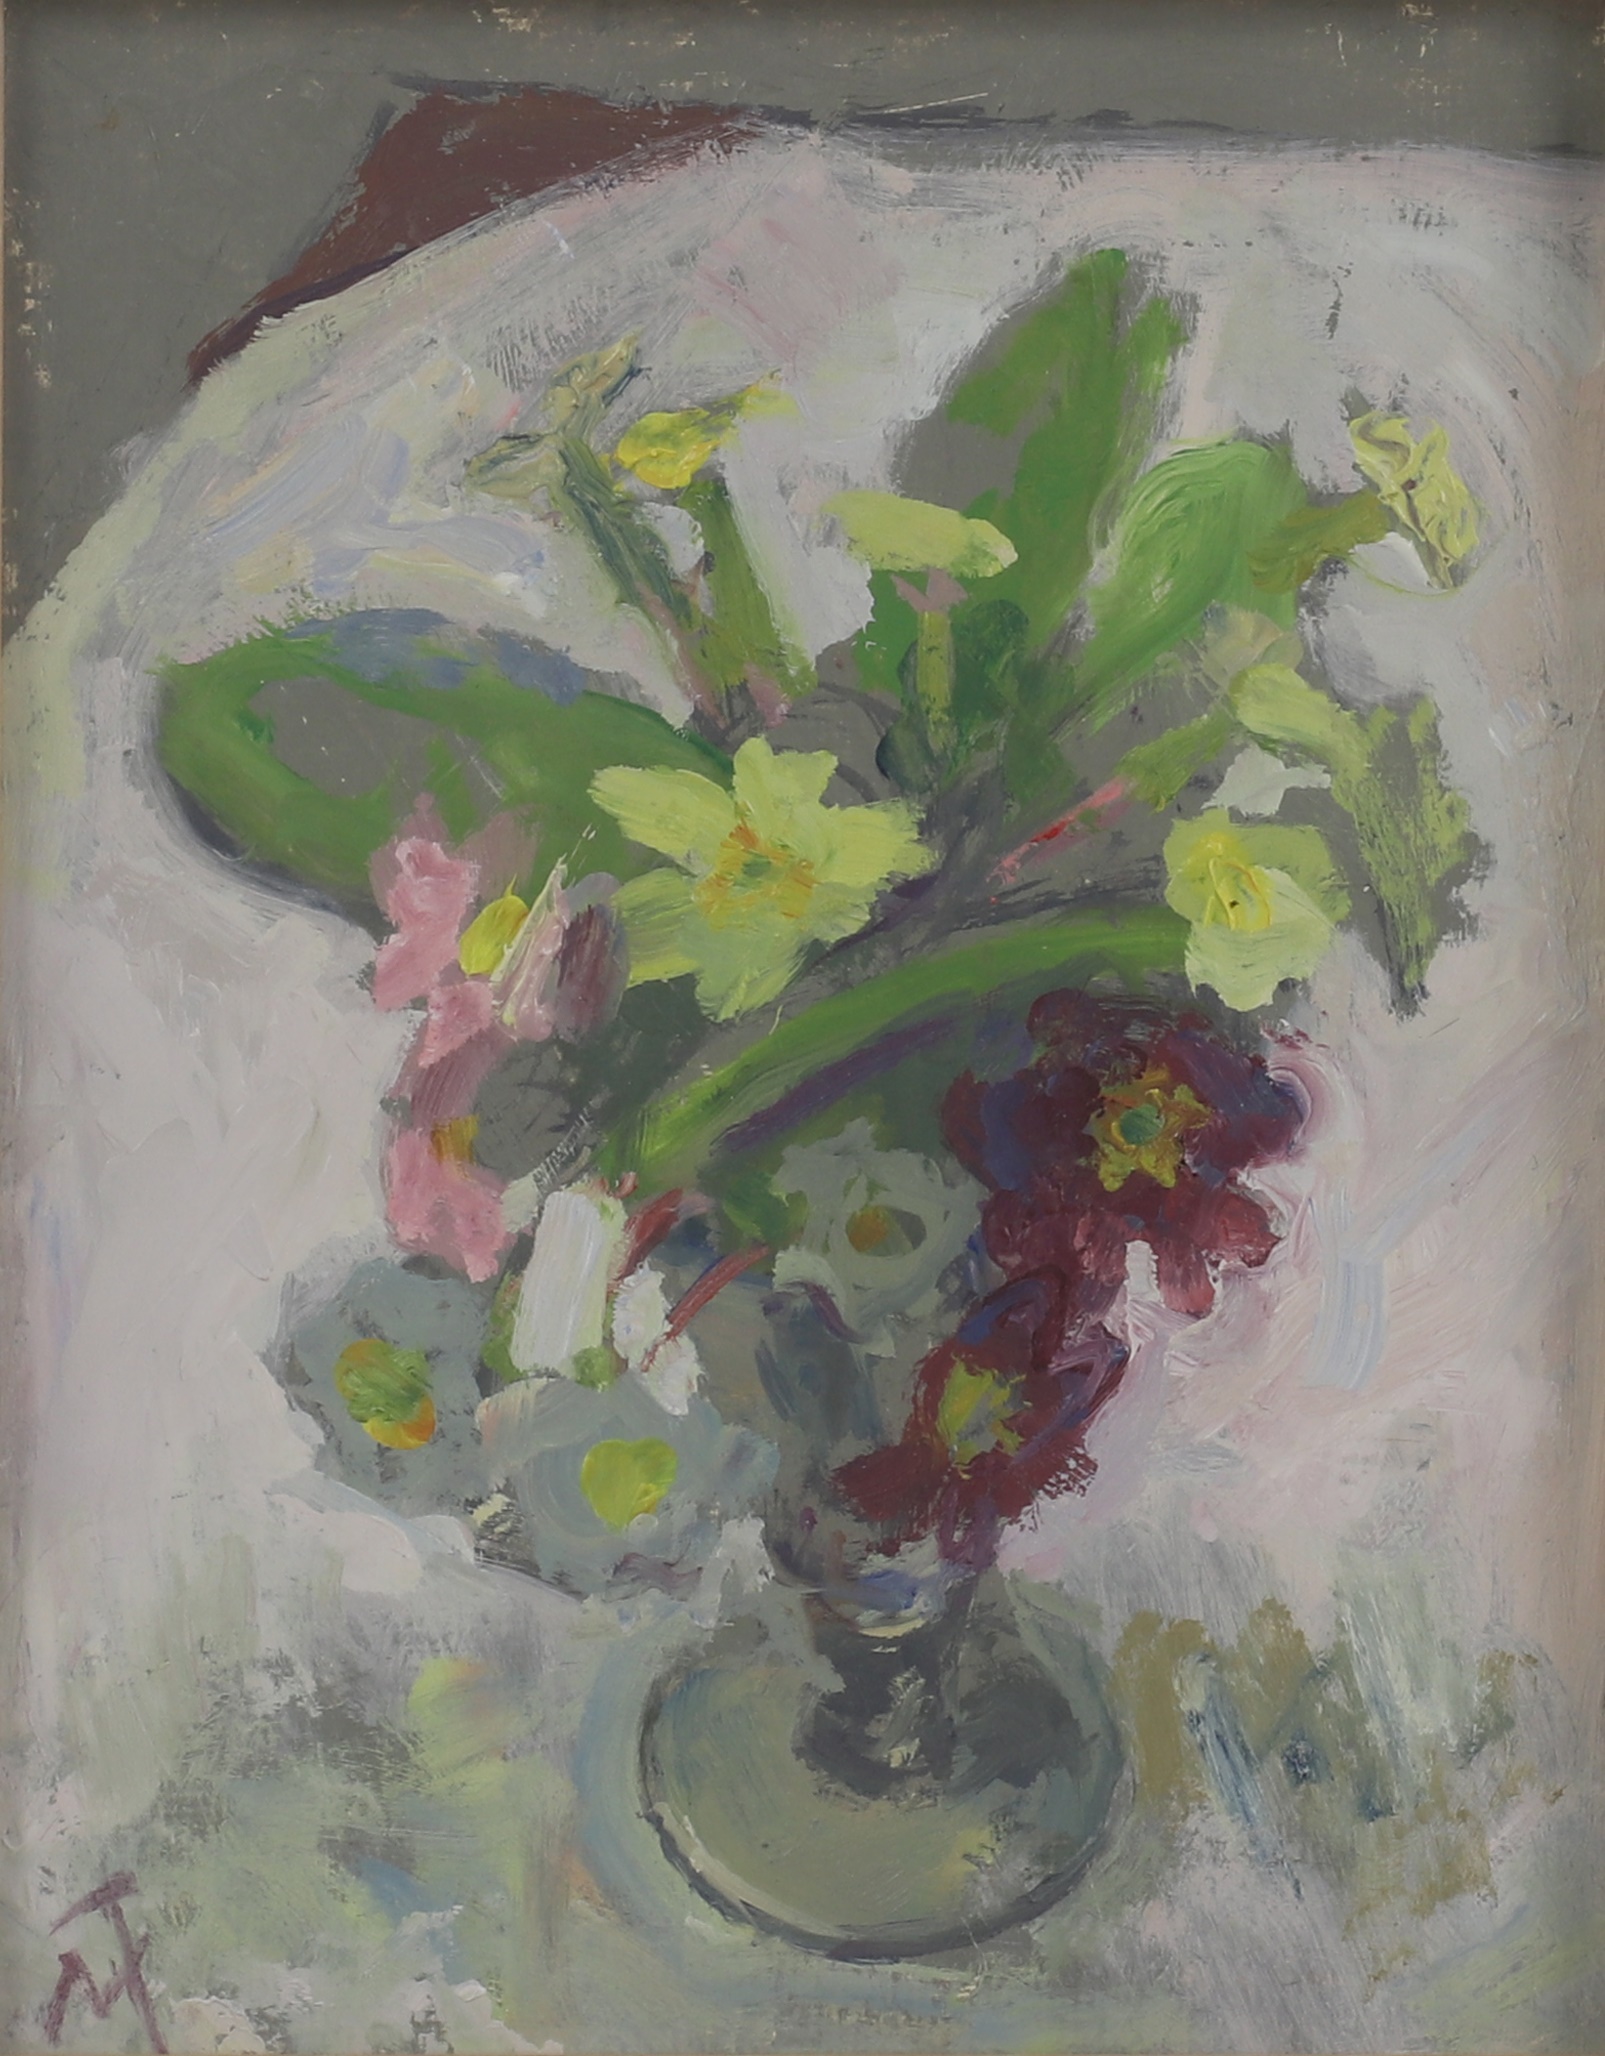 Still life of vase of spring flowers signed with monogram l.l., inscribed 'For dear MARY with MARGARET'S love- Christmas 1992' on an artist's letterhead card affixed verso, oil on board 25.5 x 20.5cm (£400-600)